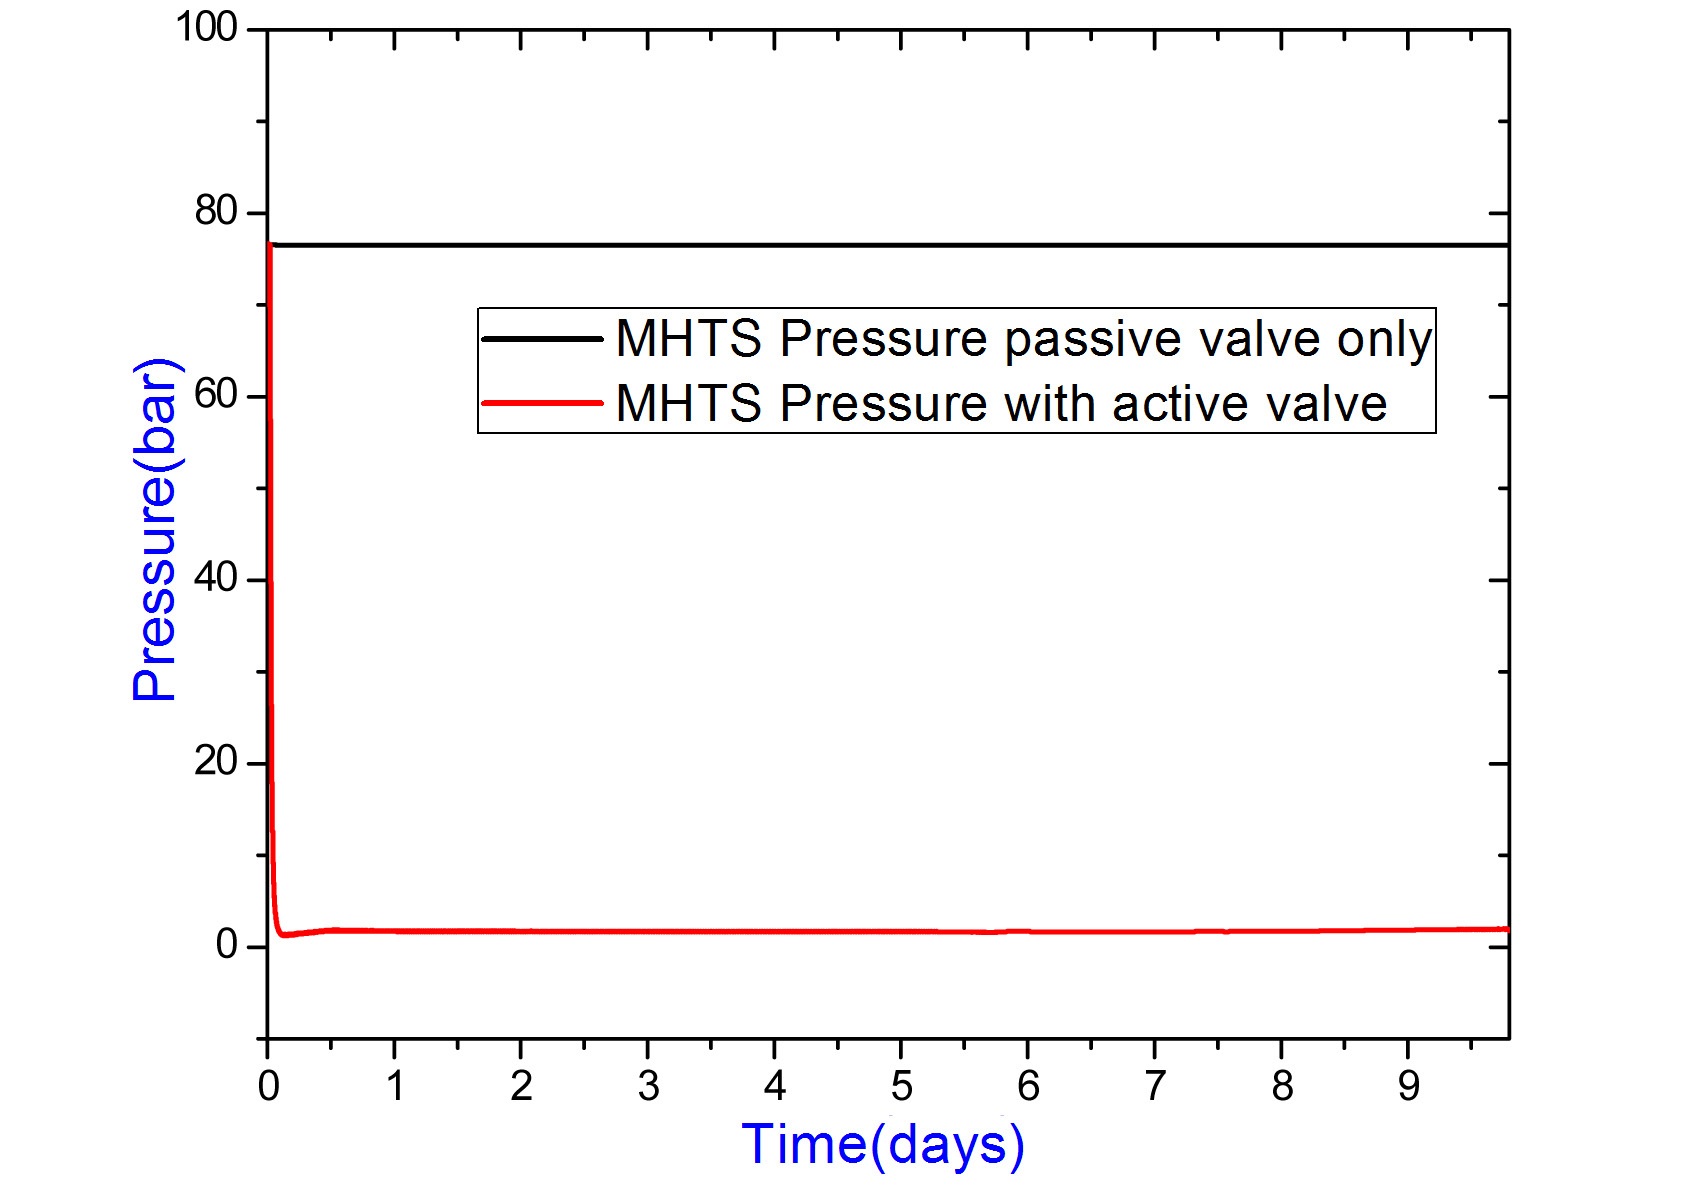 Variation of MHT Pressure with and without Active Valves